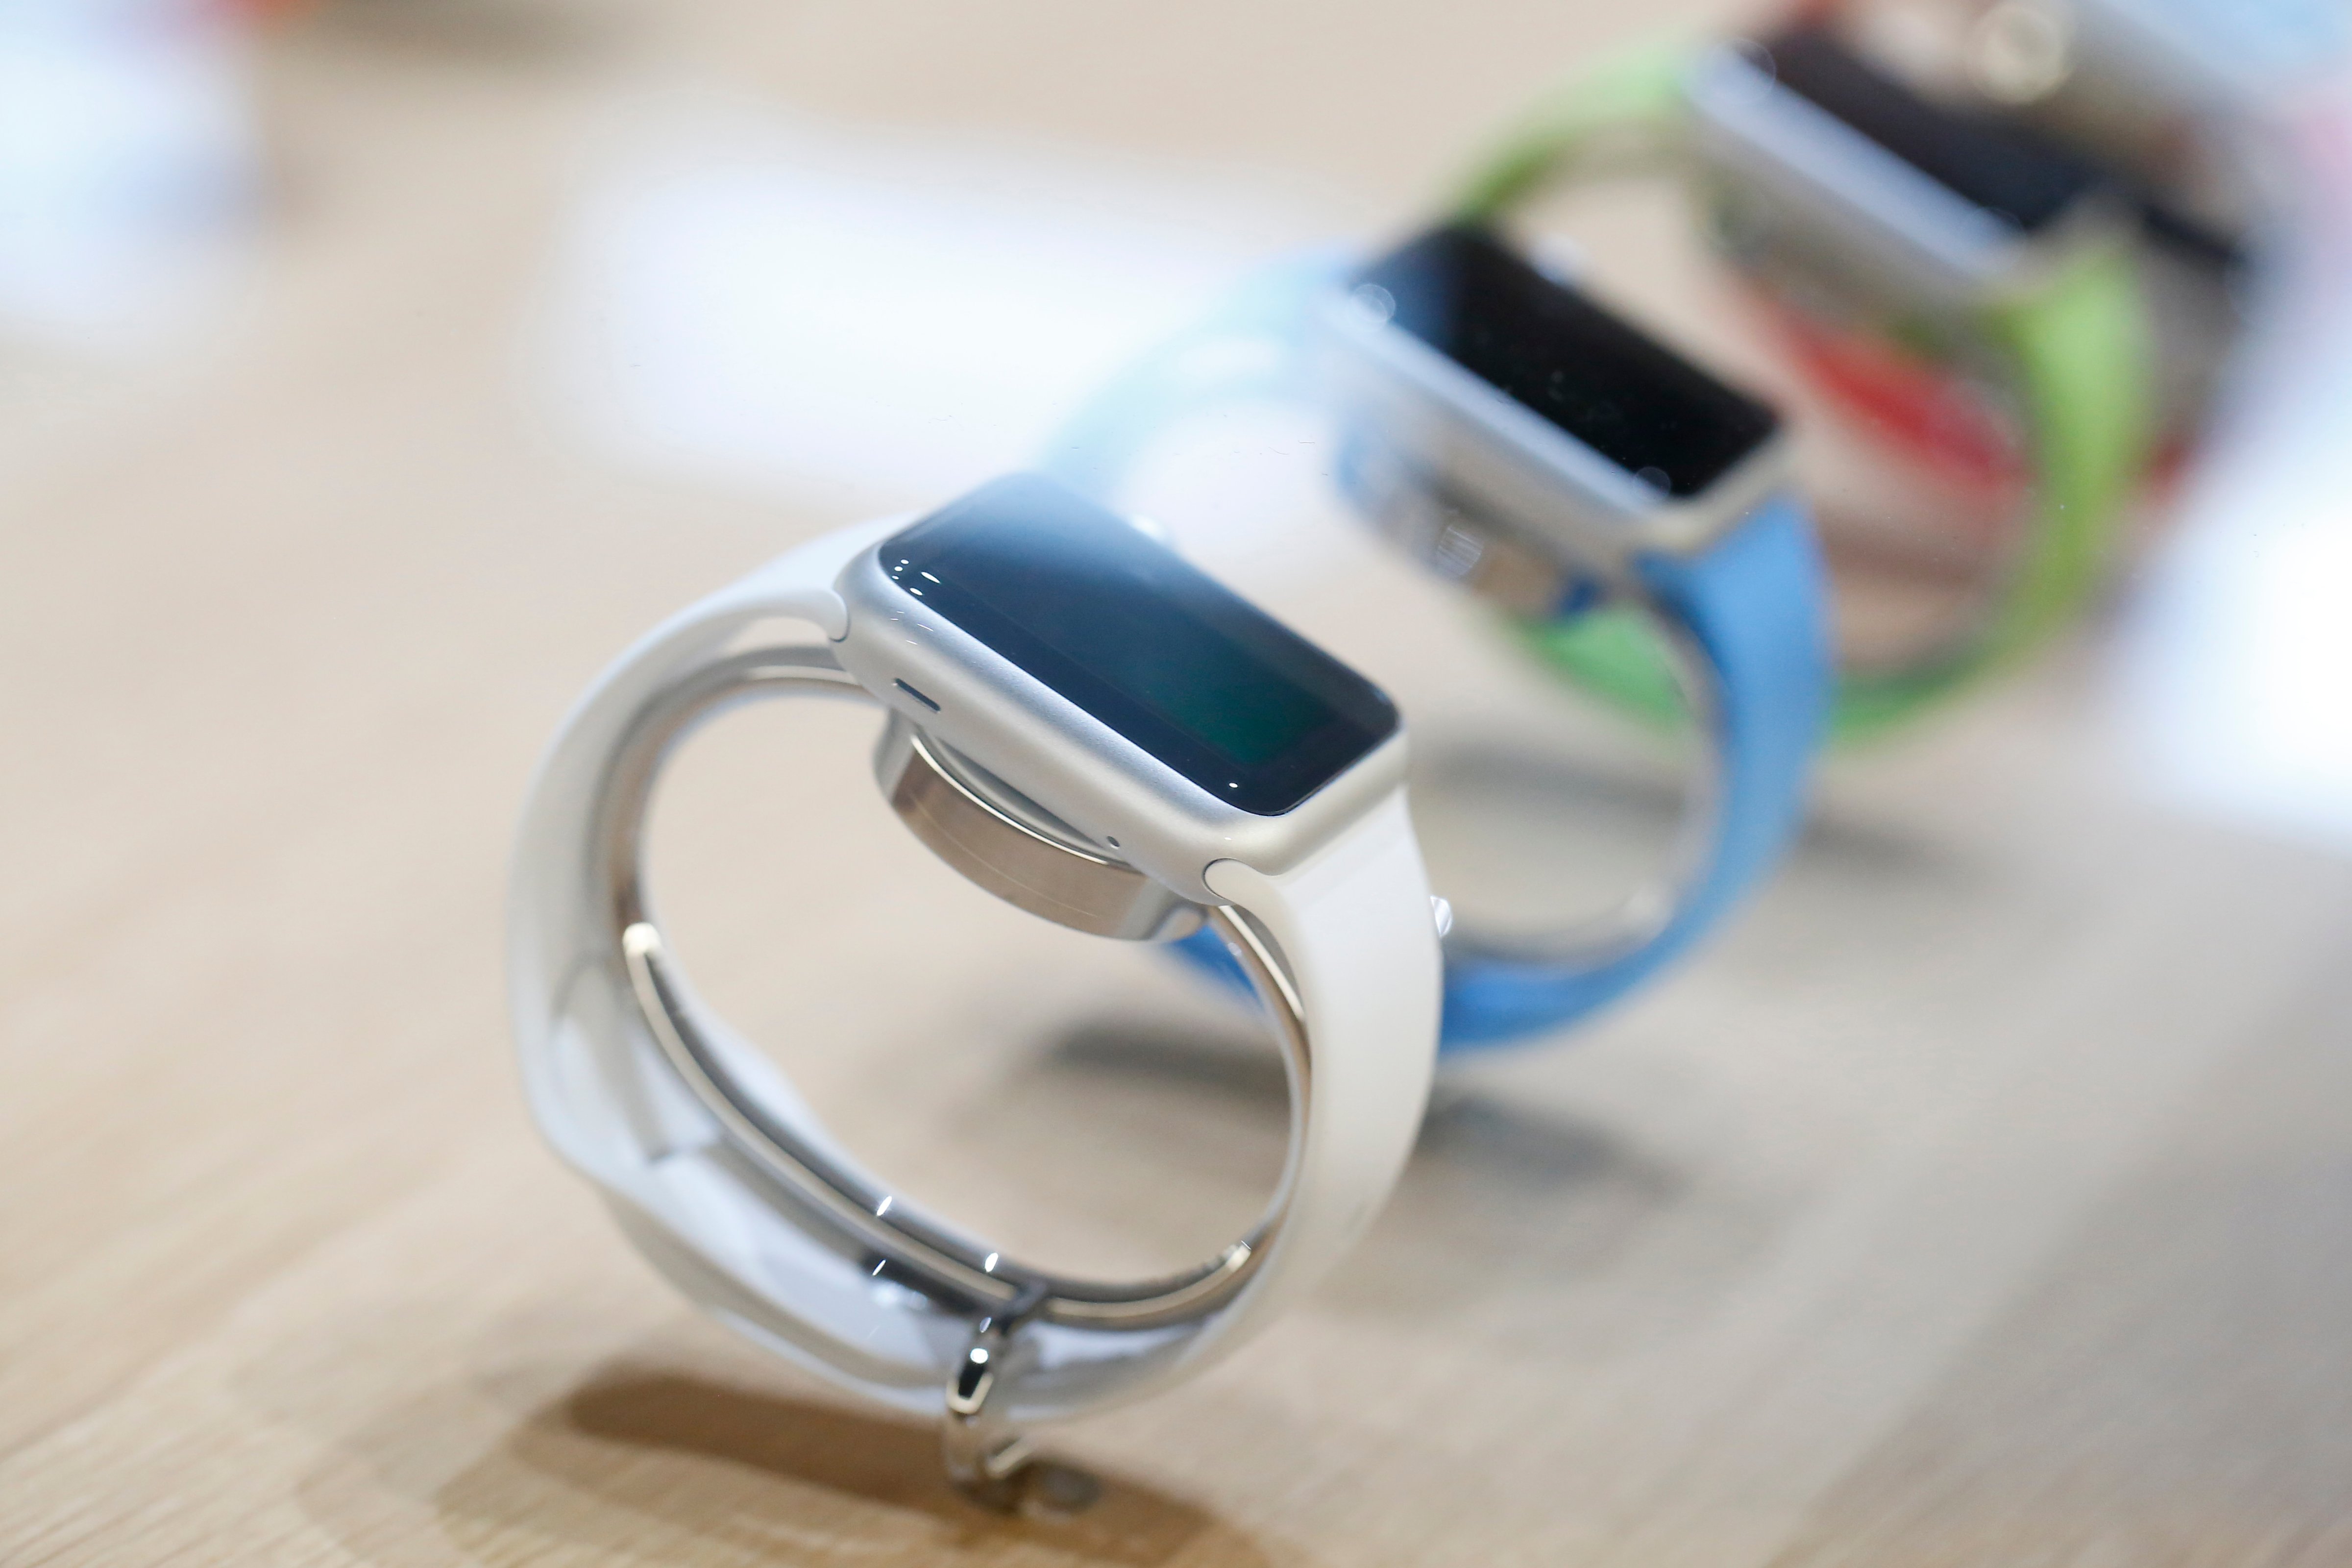 The new Apple Watch is seen on display after an Apple special event at the Yerba Buena Center for the Arts on March 9, 2015 in San Francisco, California. (Stephen Lam&mdash;Getty Images)